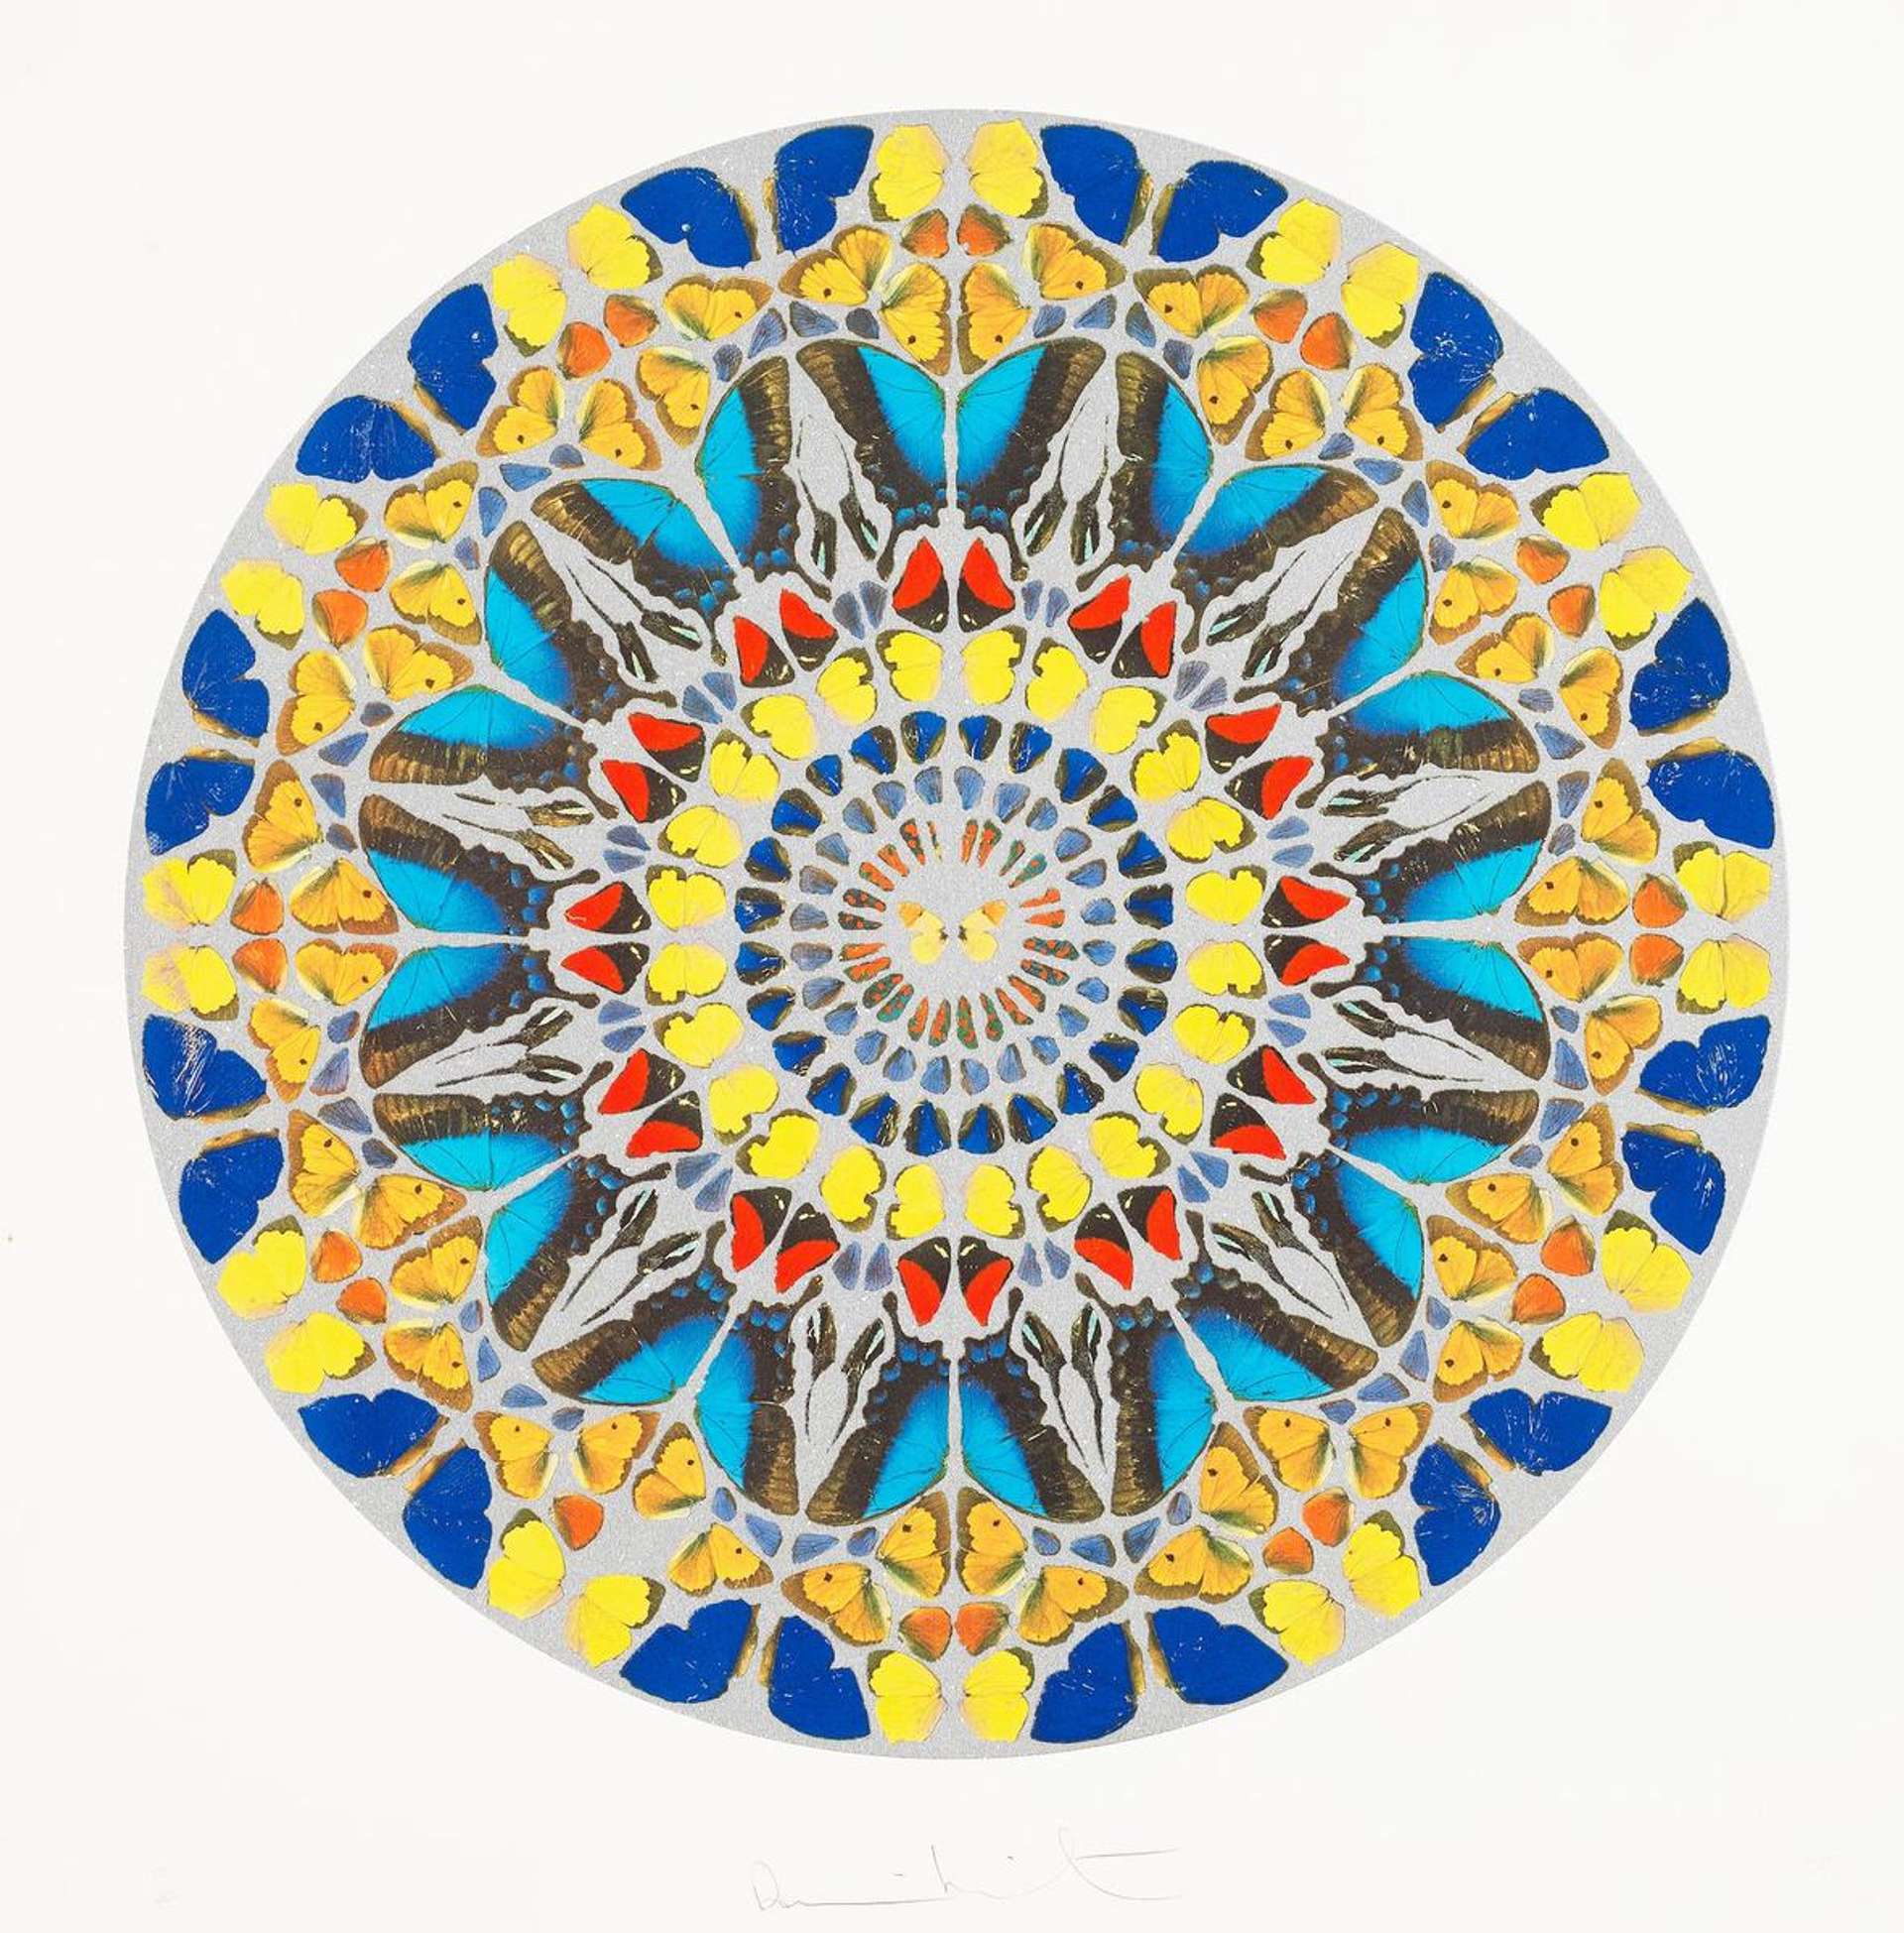 A screenprinted diamond dust artwork featuring a colorful medallion made of butterfly wings in shades of yellow, orange, and blue.